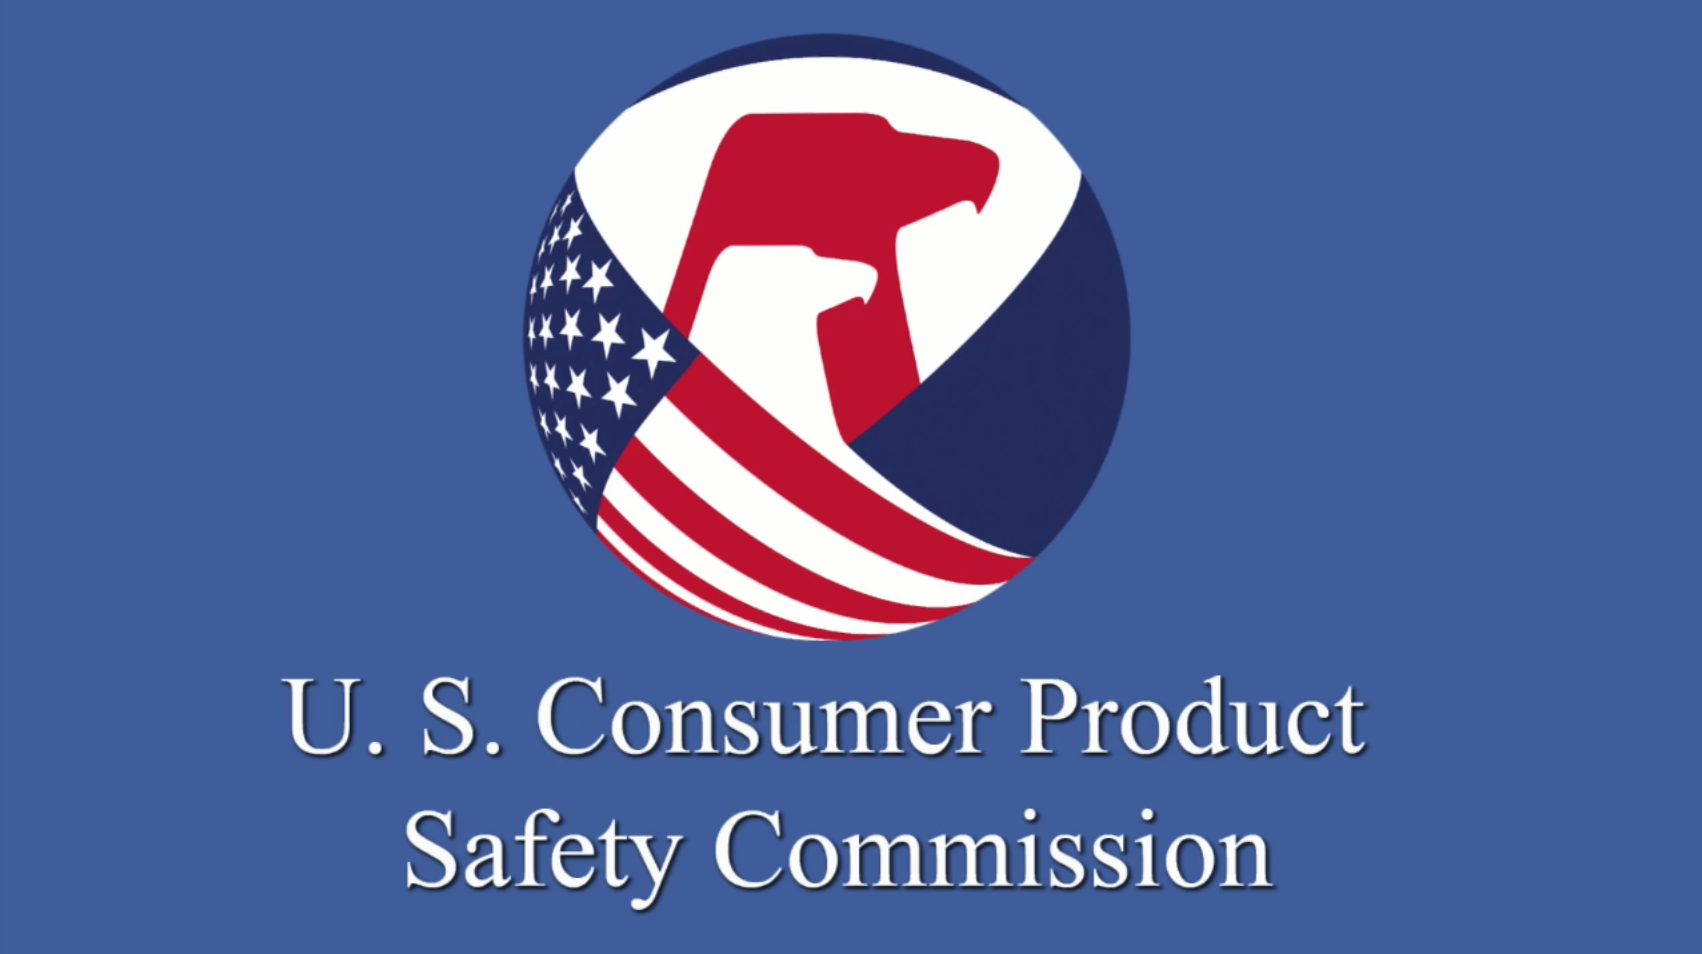 Know a college - U.S. Consumer Product Safety Commission